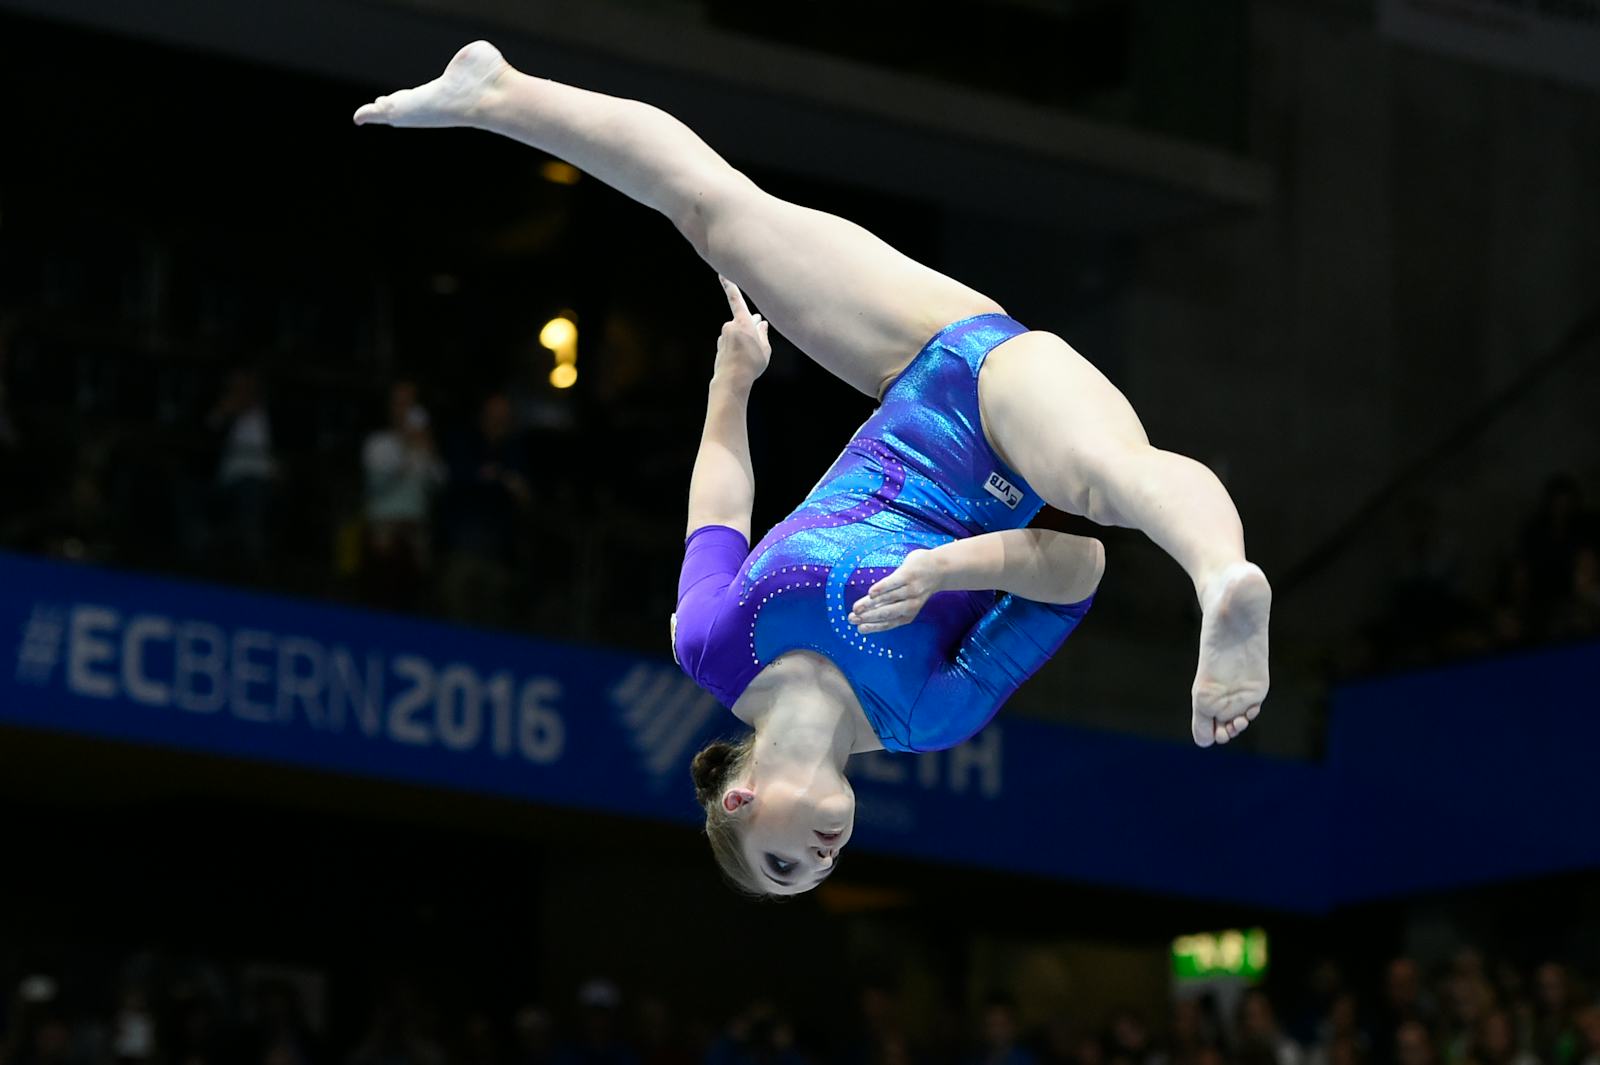 Who Is Aliya Mustafina This Russian Gymnast Wants To Lead Her Team To